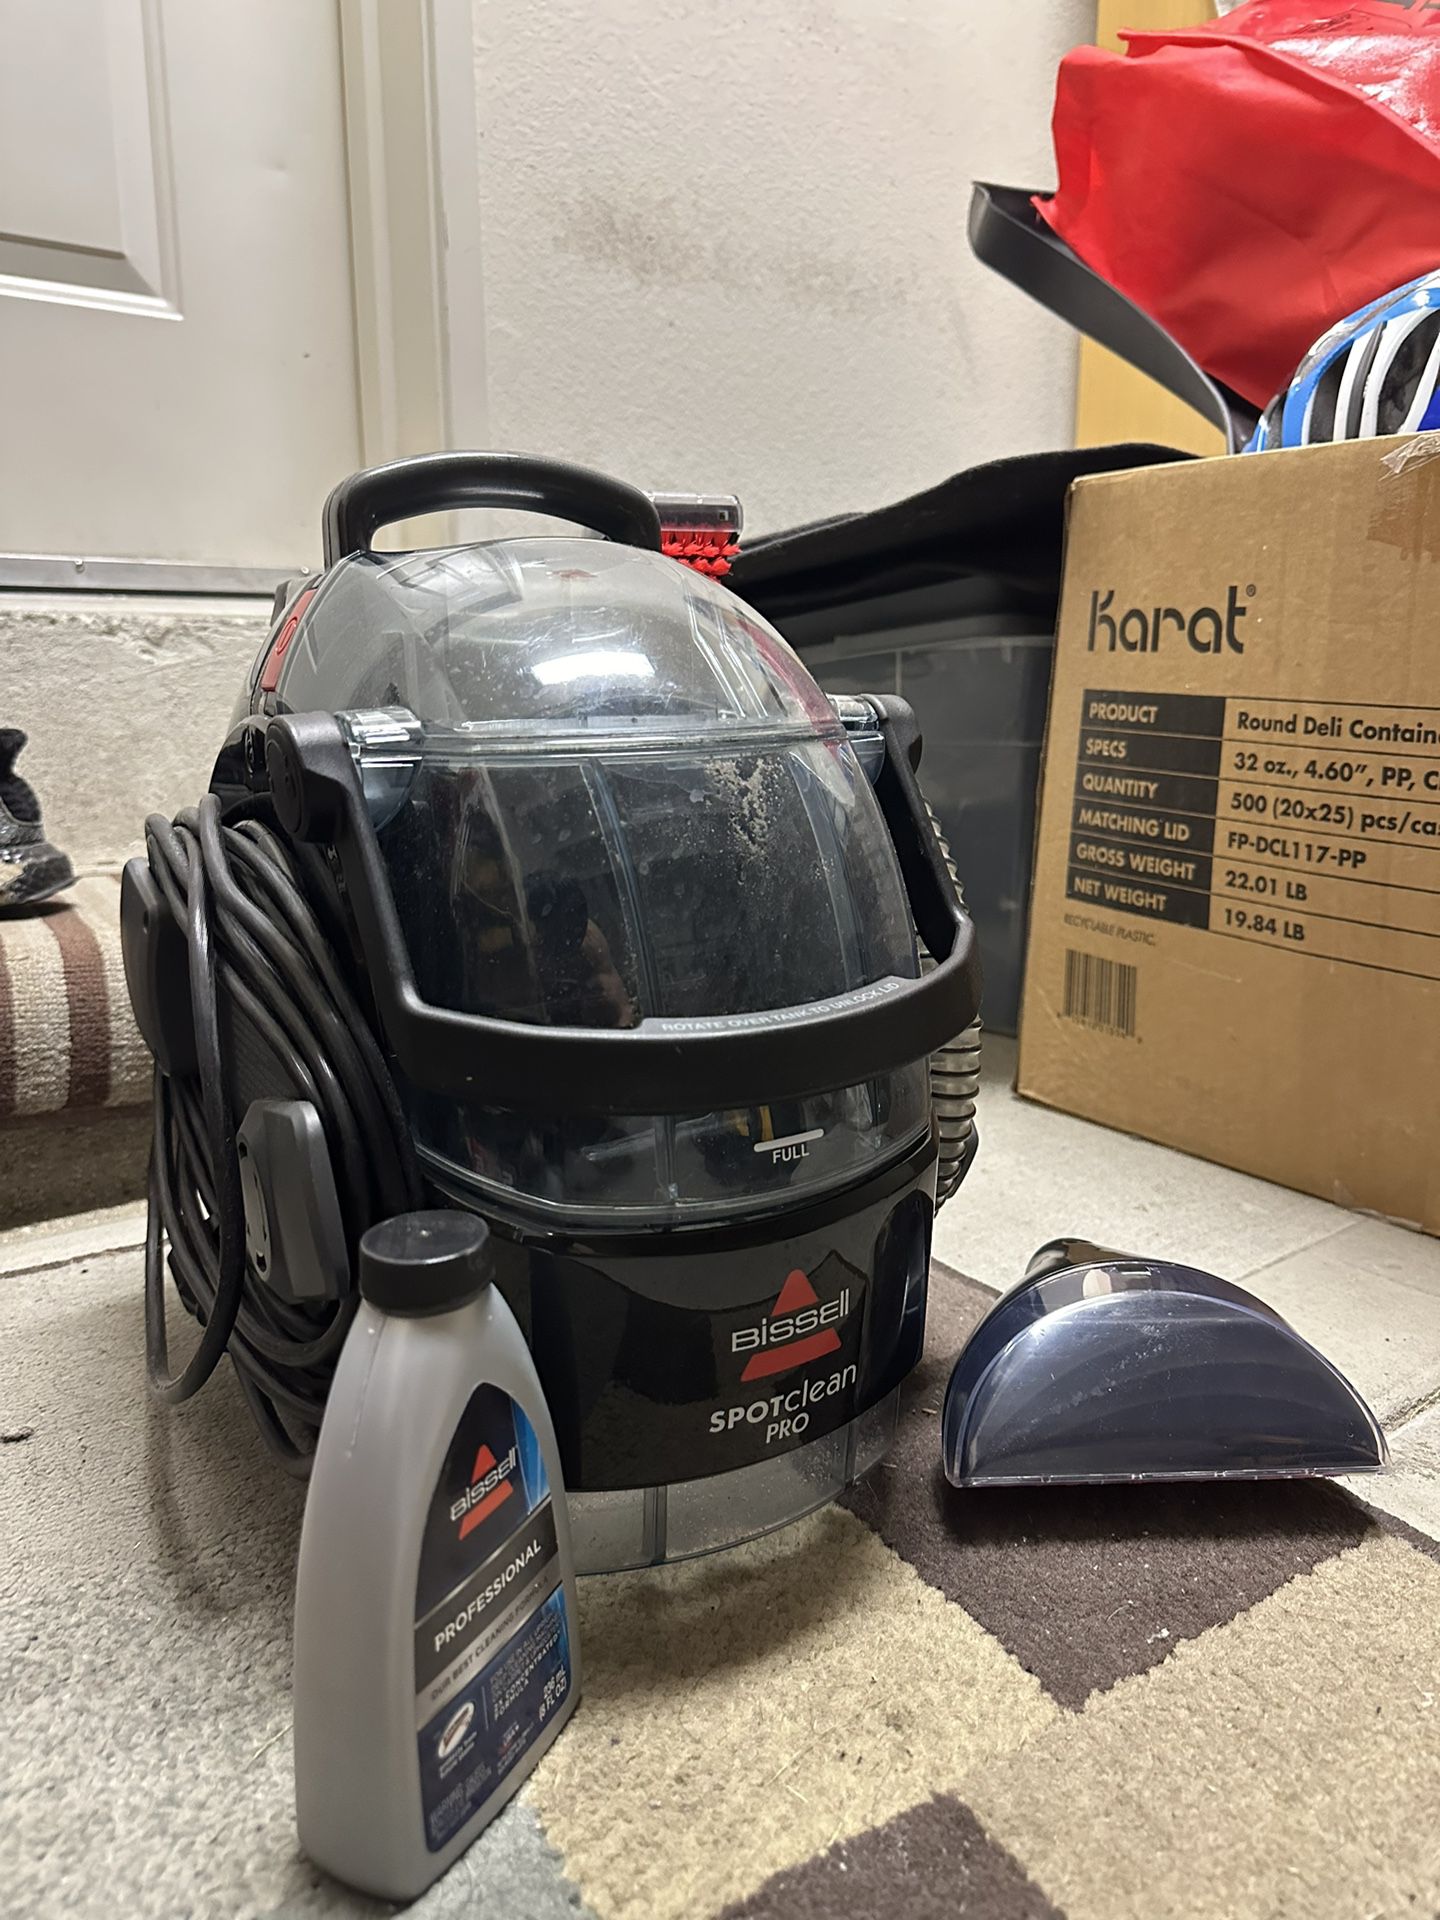 Bissell SpotClean Pro for Carpet Extraction